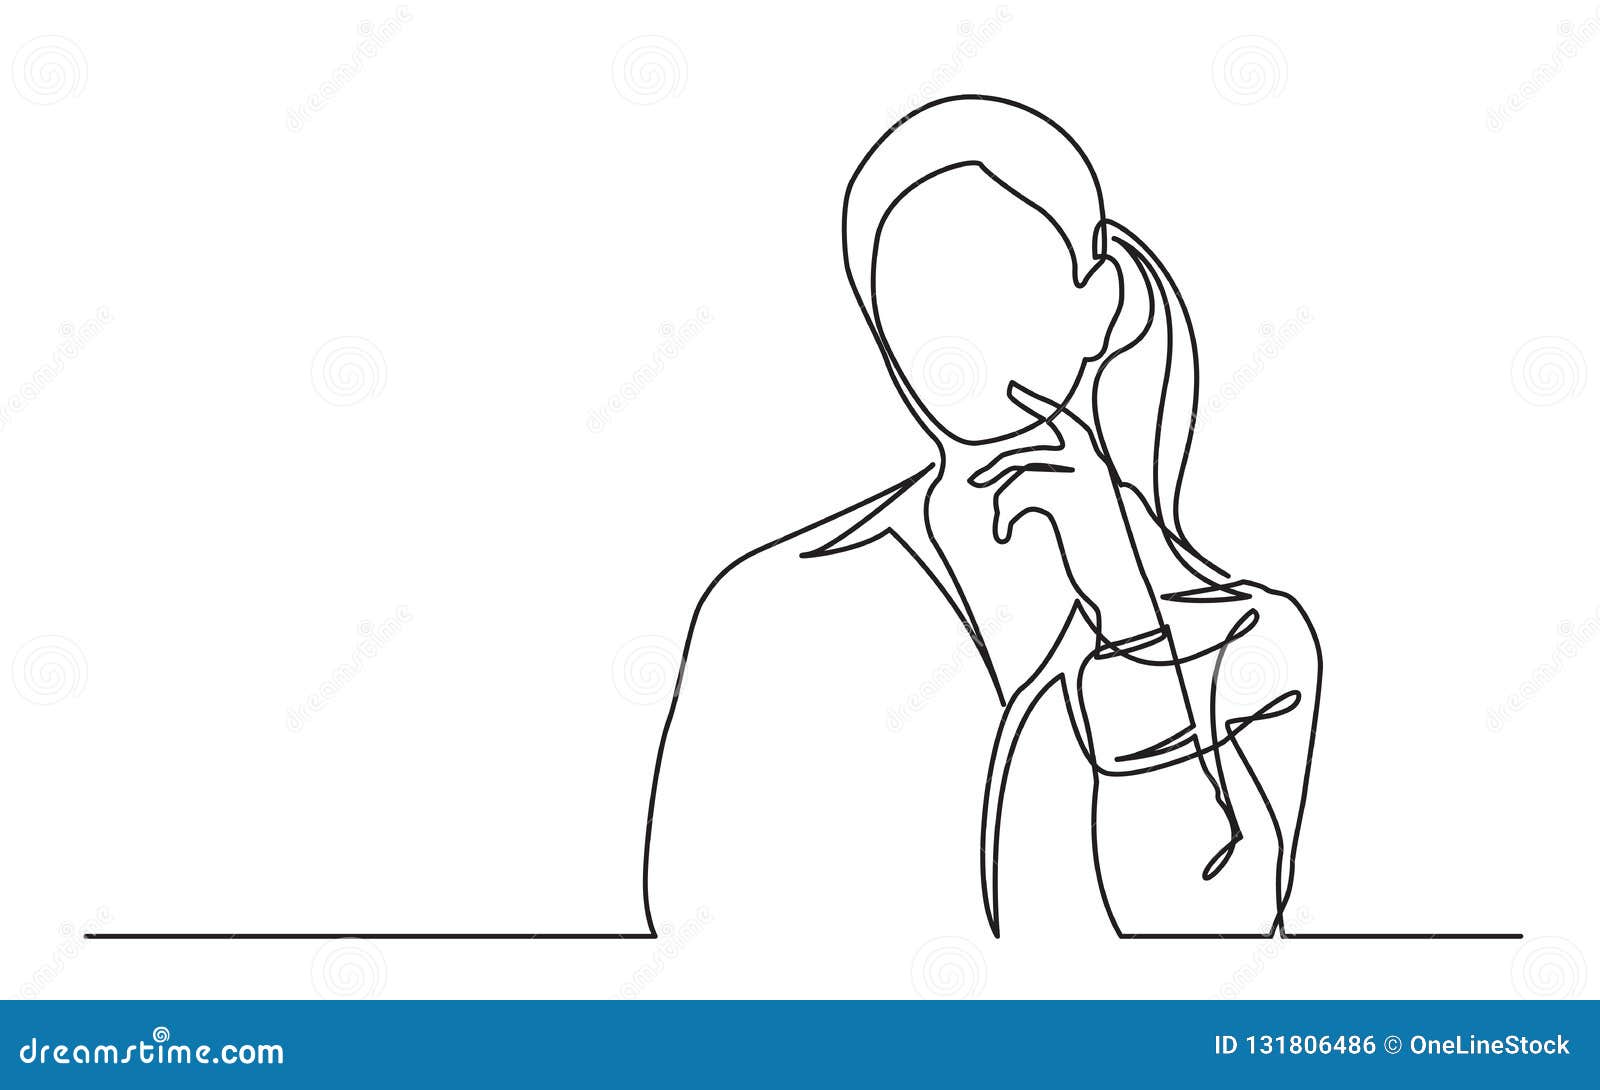 Continuous one line drawing little girl thinking Vector Image